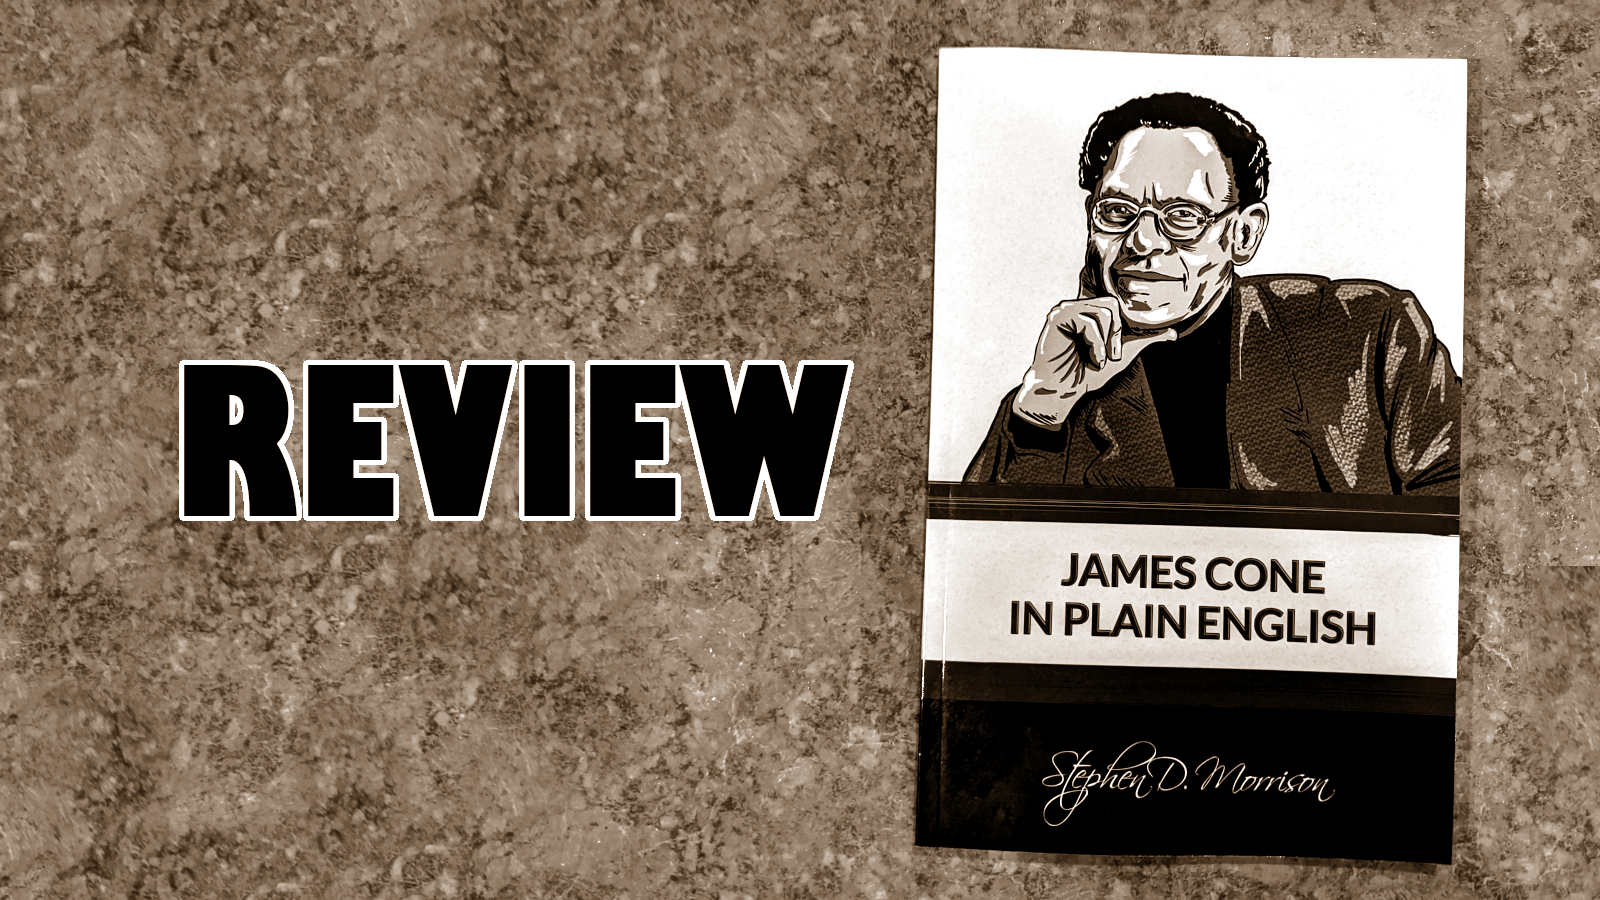 Review: James Cone In Plain English by Stephen D. Morrison